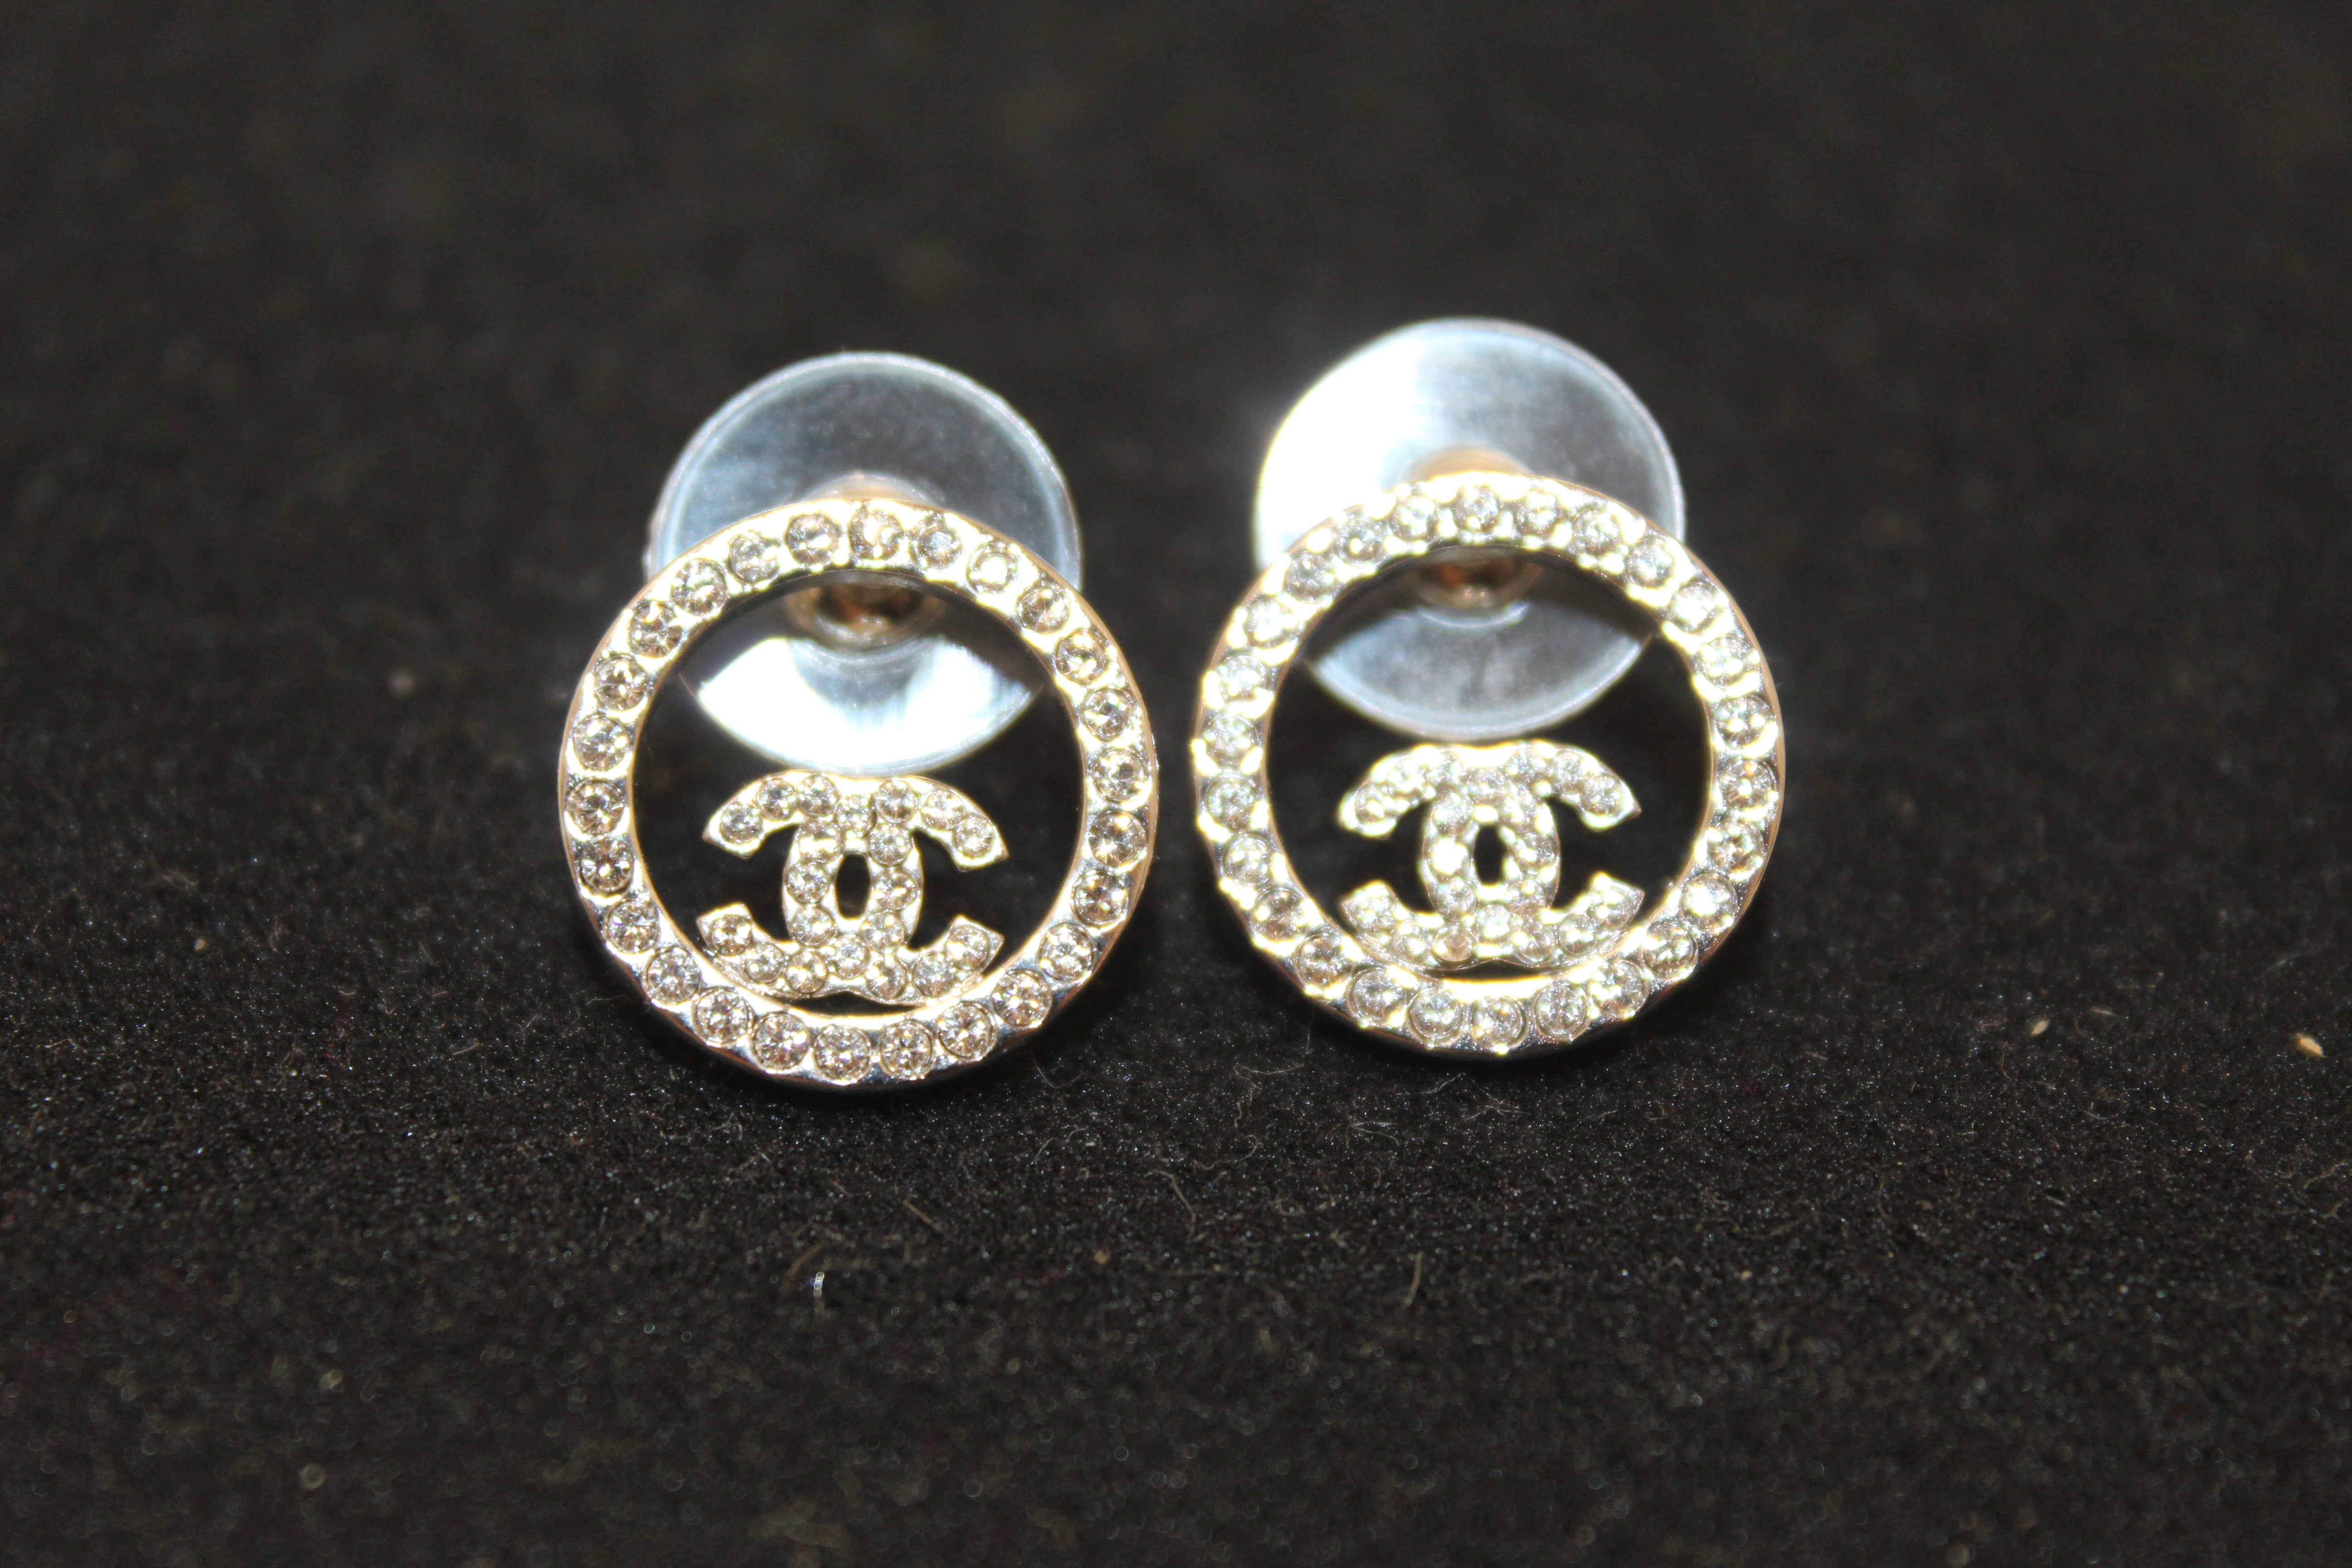 Sold at Auction: 18K White Gold Chanel Stud Earrings